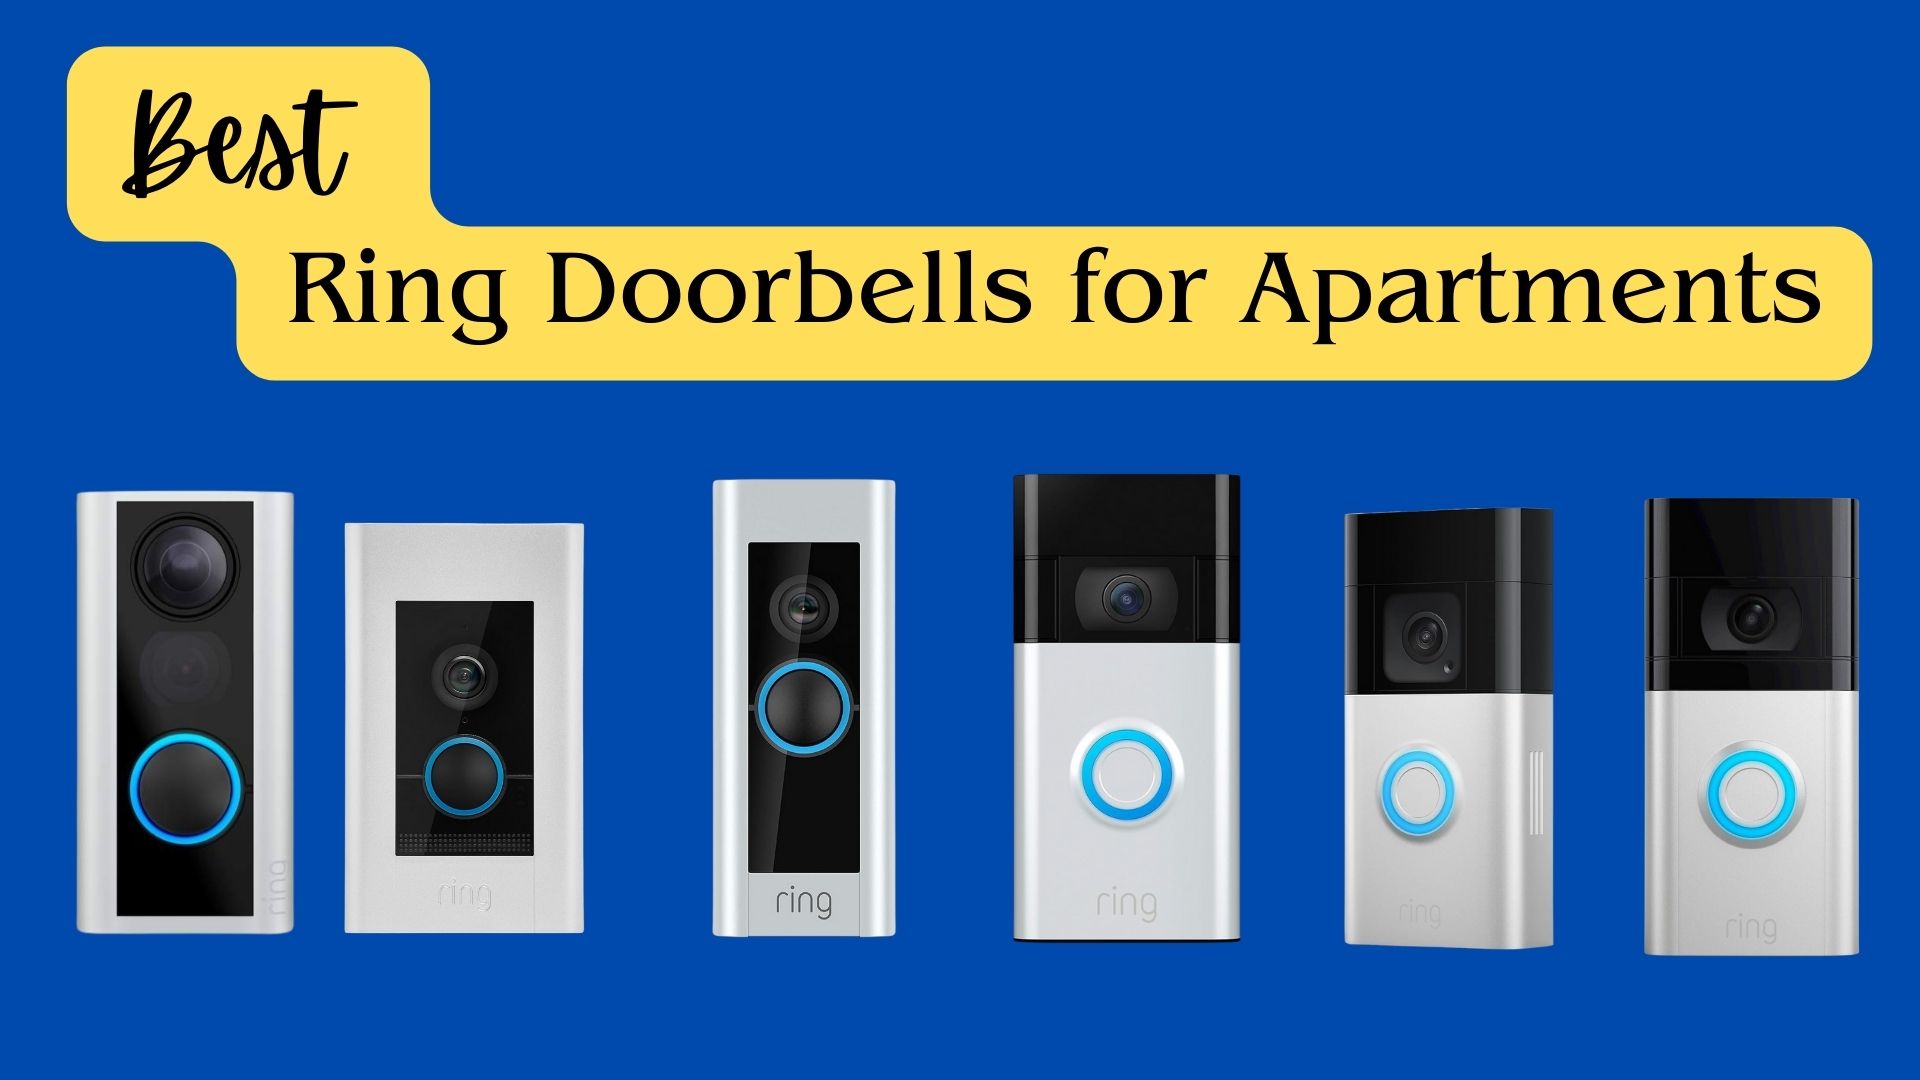 6 Best Ring Doorbells for Apartments: Protect Your House with the Best Security Devices